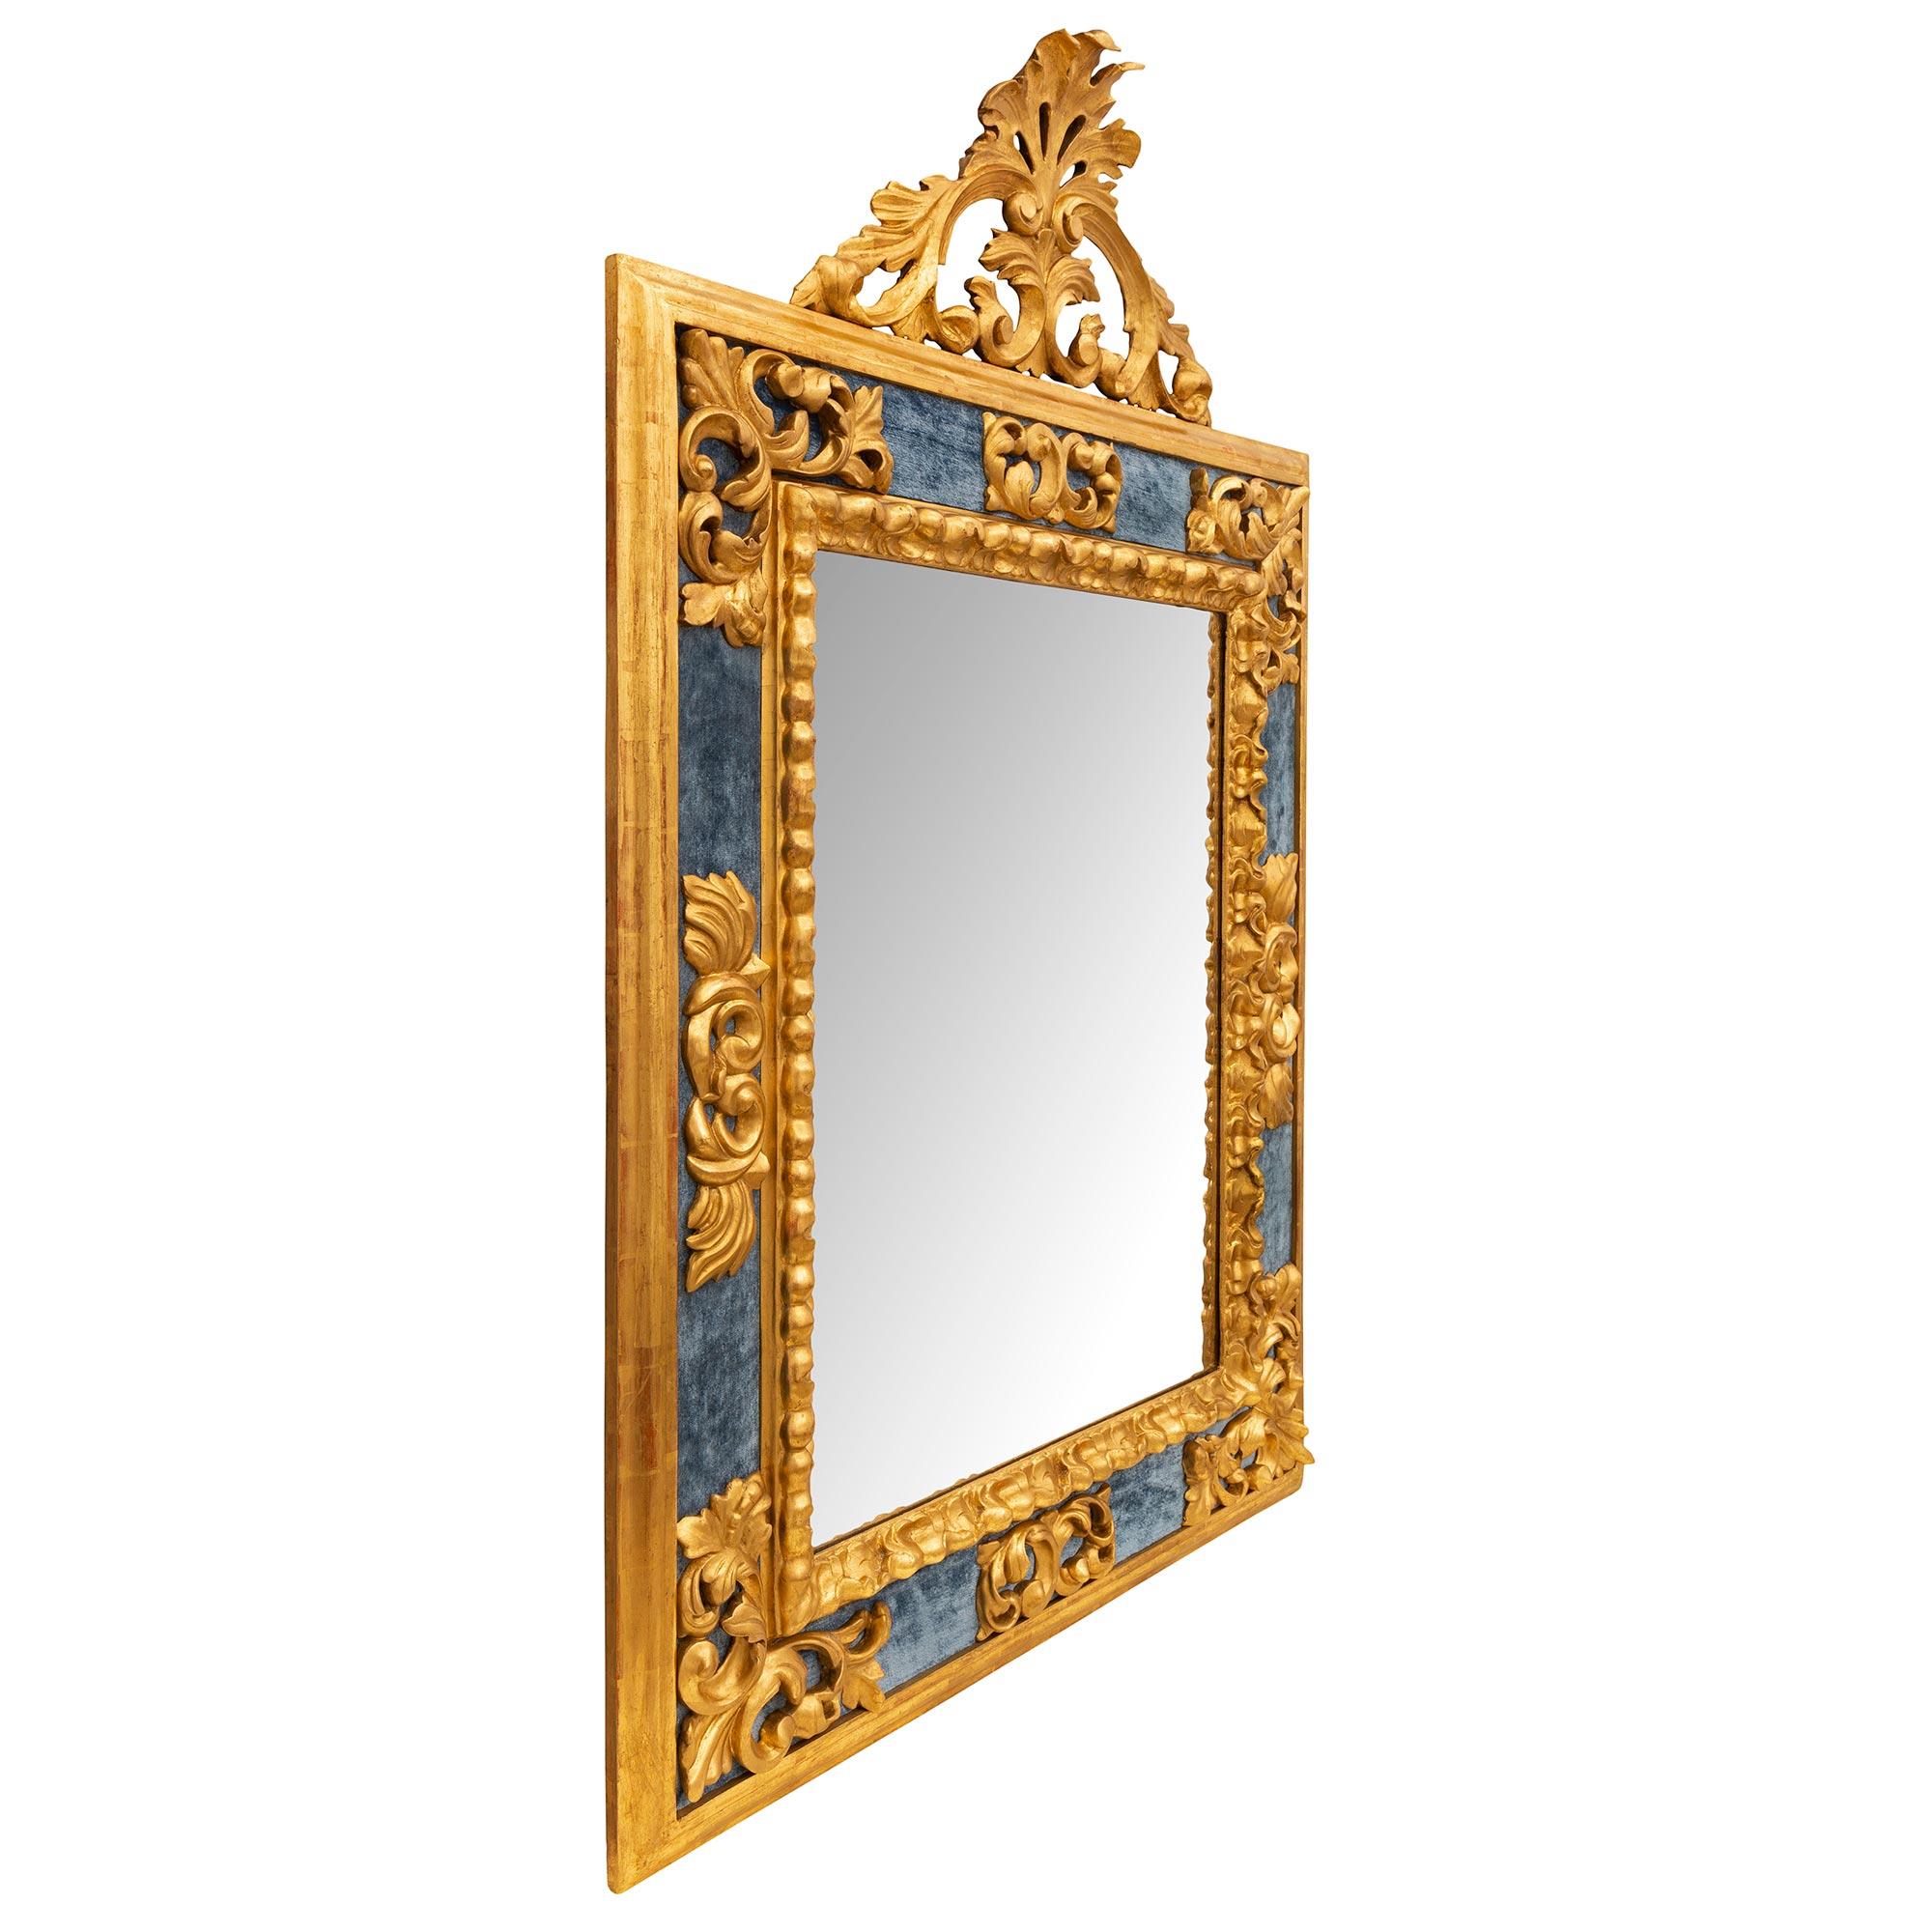 A unique and most decorative Italian early 19th century Baroque st. giltwood and blue velvet mirror. The original mirror plate is framed within a beautiful mottled carved foliate band leading out to lovely richly carved scrolled pierced foliate